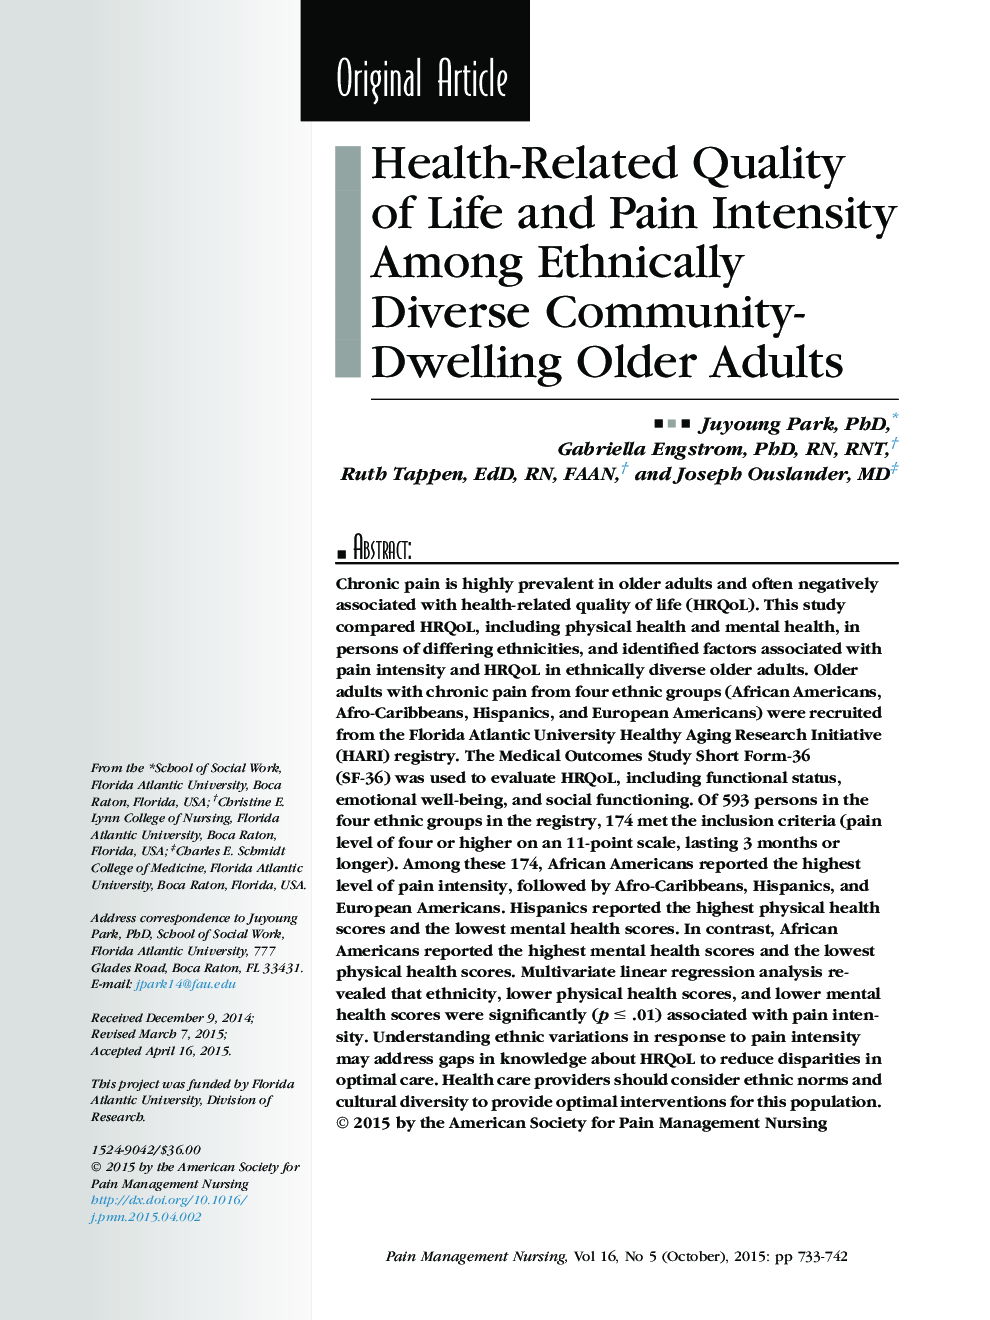 Health-Related Quality of Life and Pain Intensity Among Ethnically Diverse Community-Dwelling Older Adults 